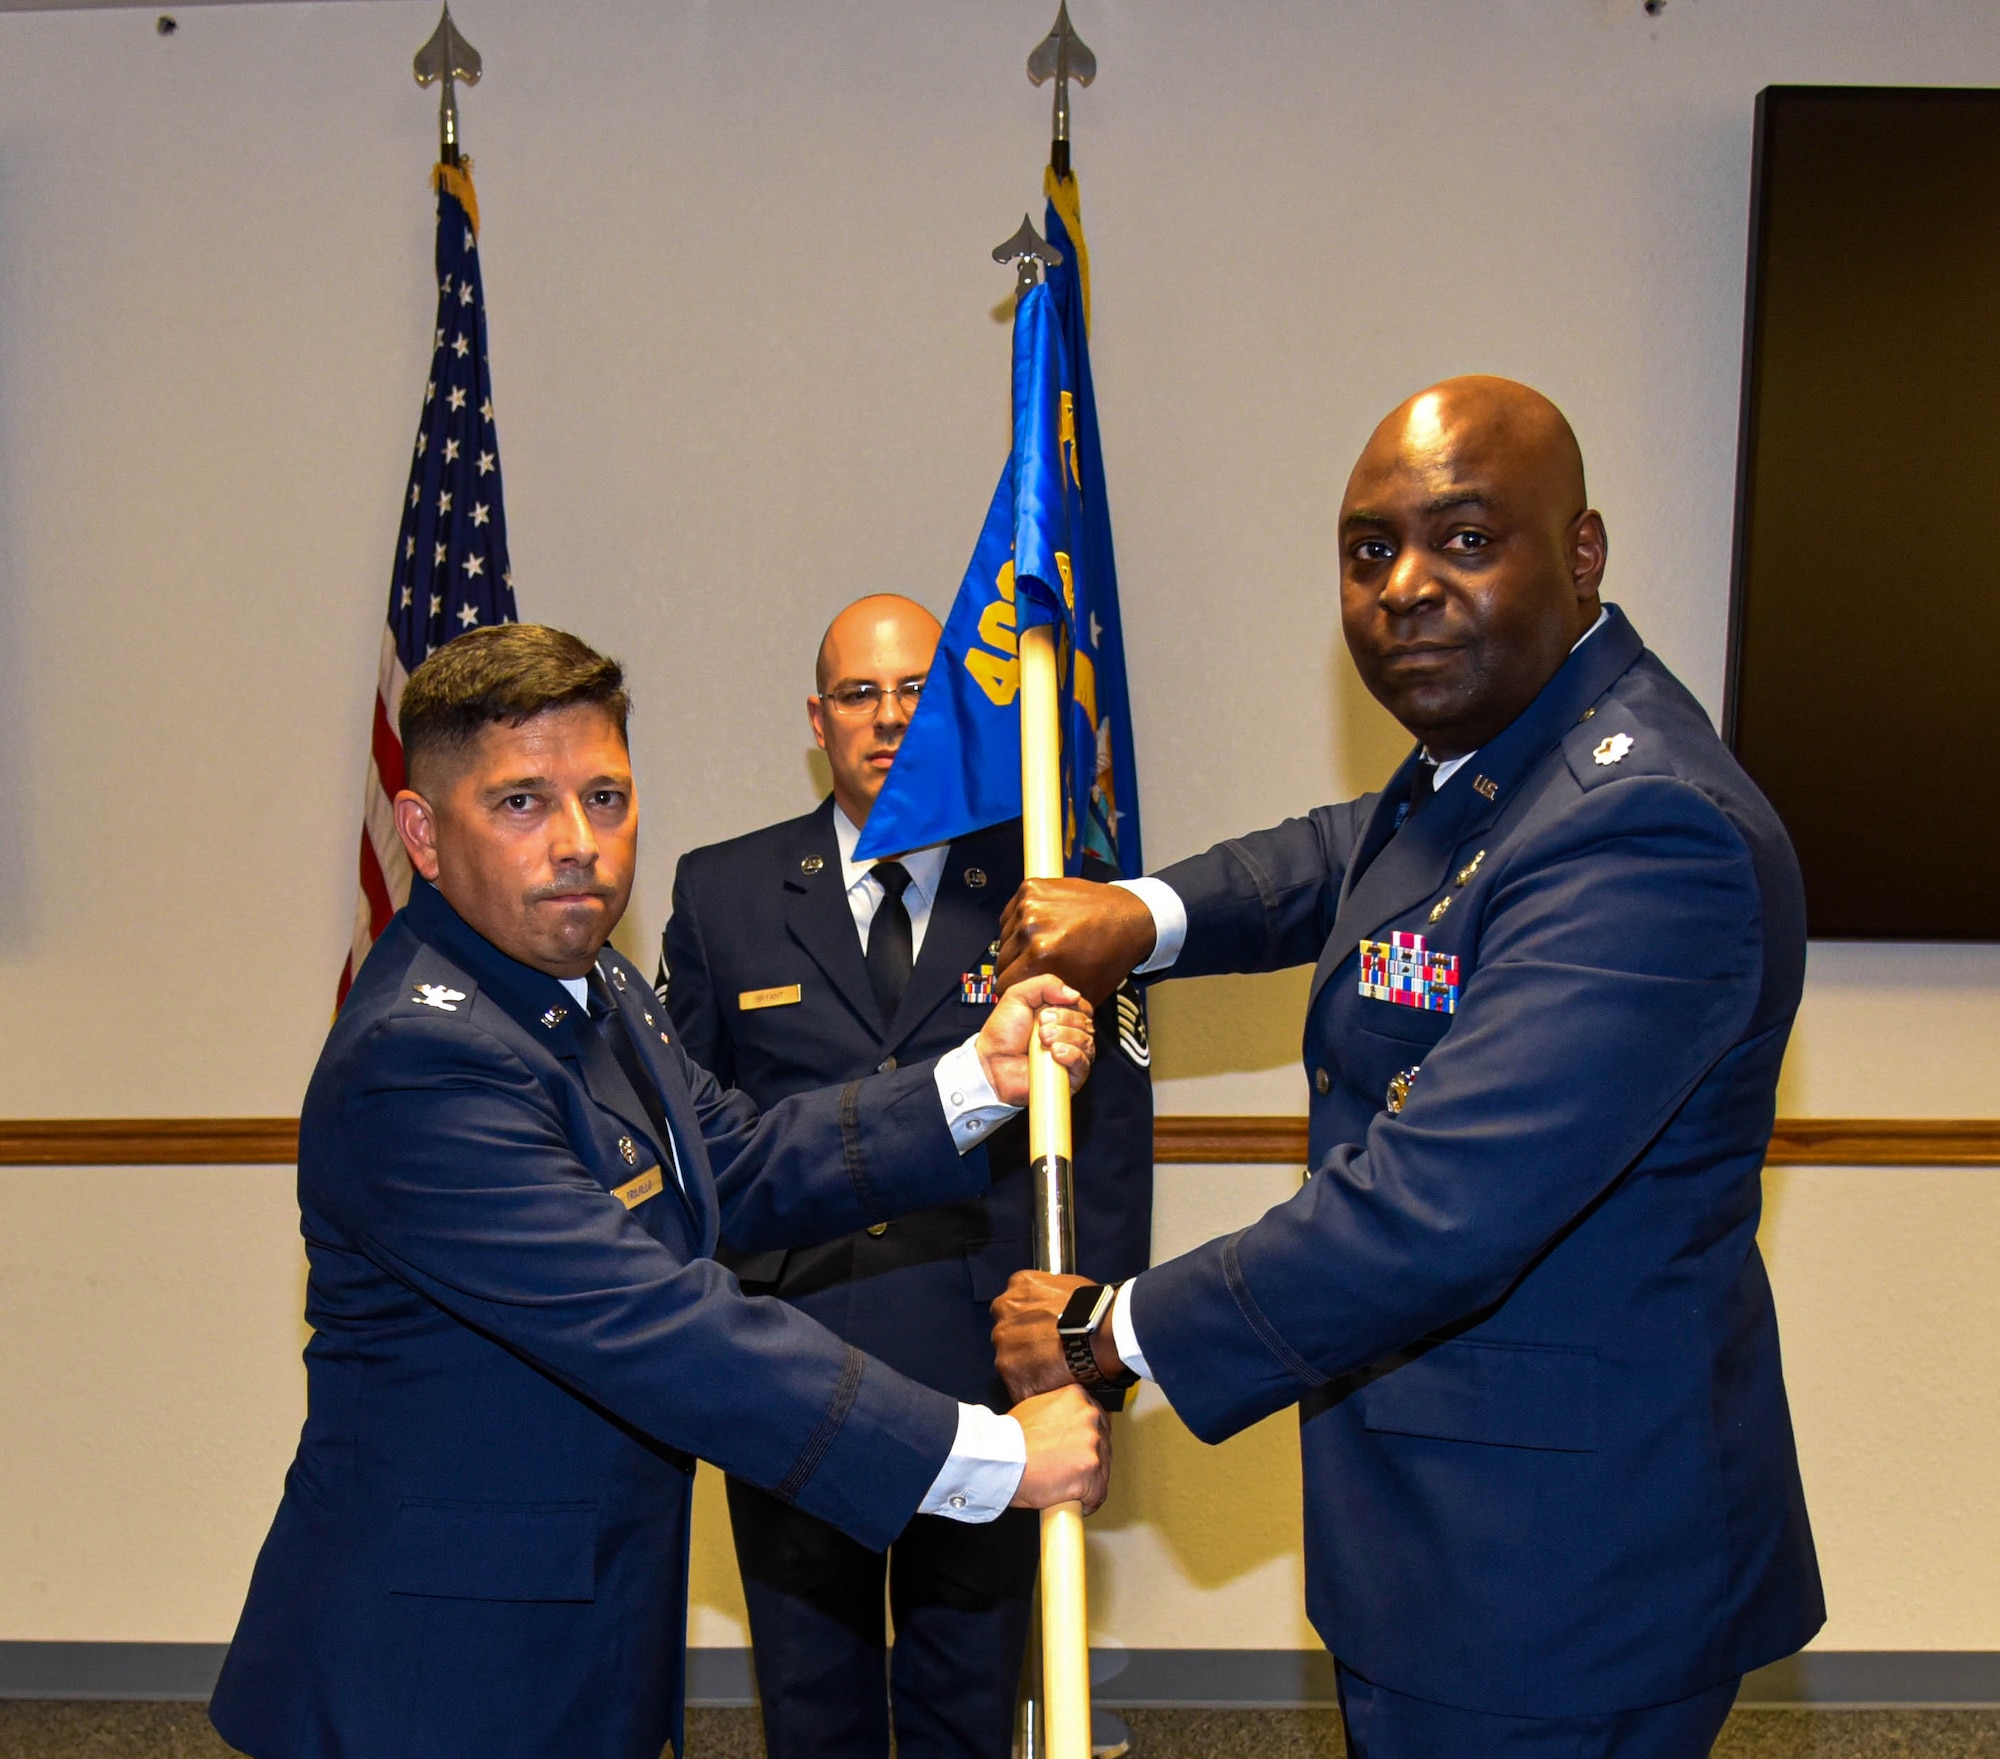 Lt. Col. Costau C. Bastien (right), commander, 403rd Force Support Squadron accepts the 403rd Force Support Squadron guidon from Col. Reggie Trujillo (left), commander, 403rd Mission Support Group during an assumption of command ceremony in the Sablich Center auditorium at Keesler Air Force Base, Miss. July 10, 2021. (U.S. Air Force photo by Tech. Sgt. Michael Farrar)